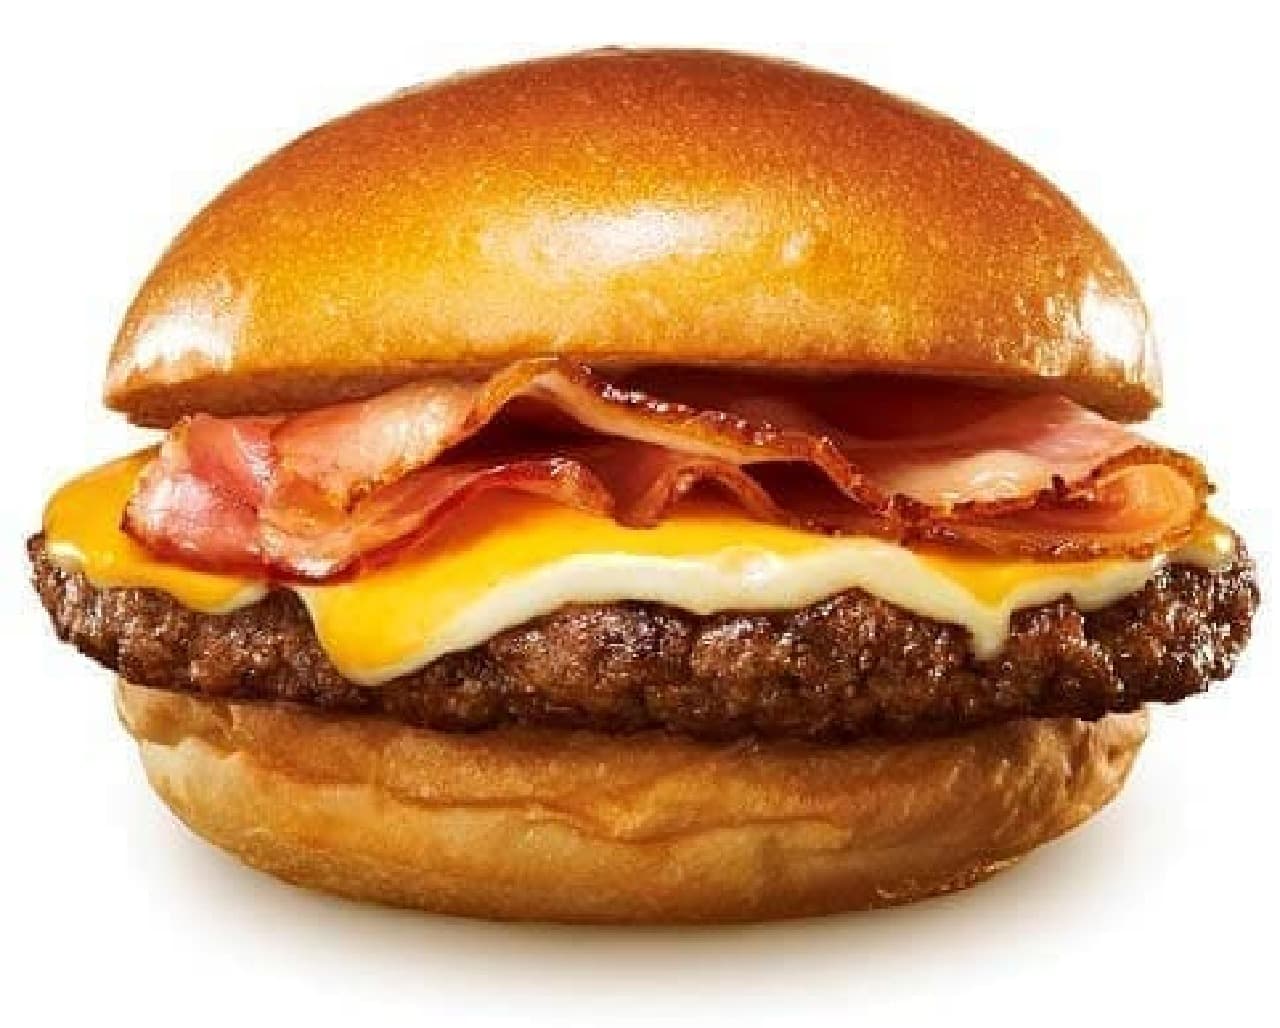 Lotteria with "Feast Wide Exquisite Bacon Cheeseburger"